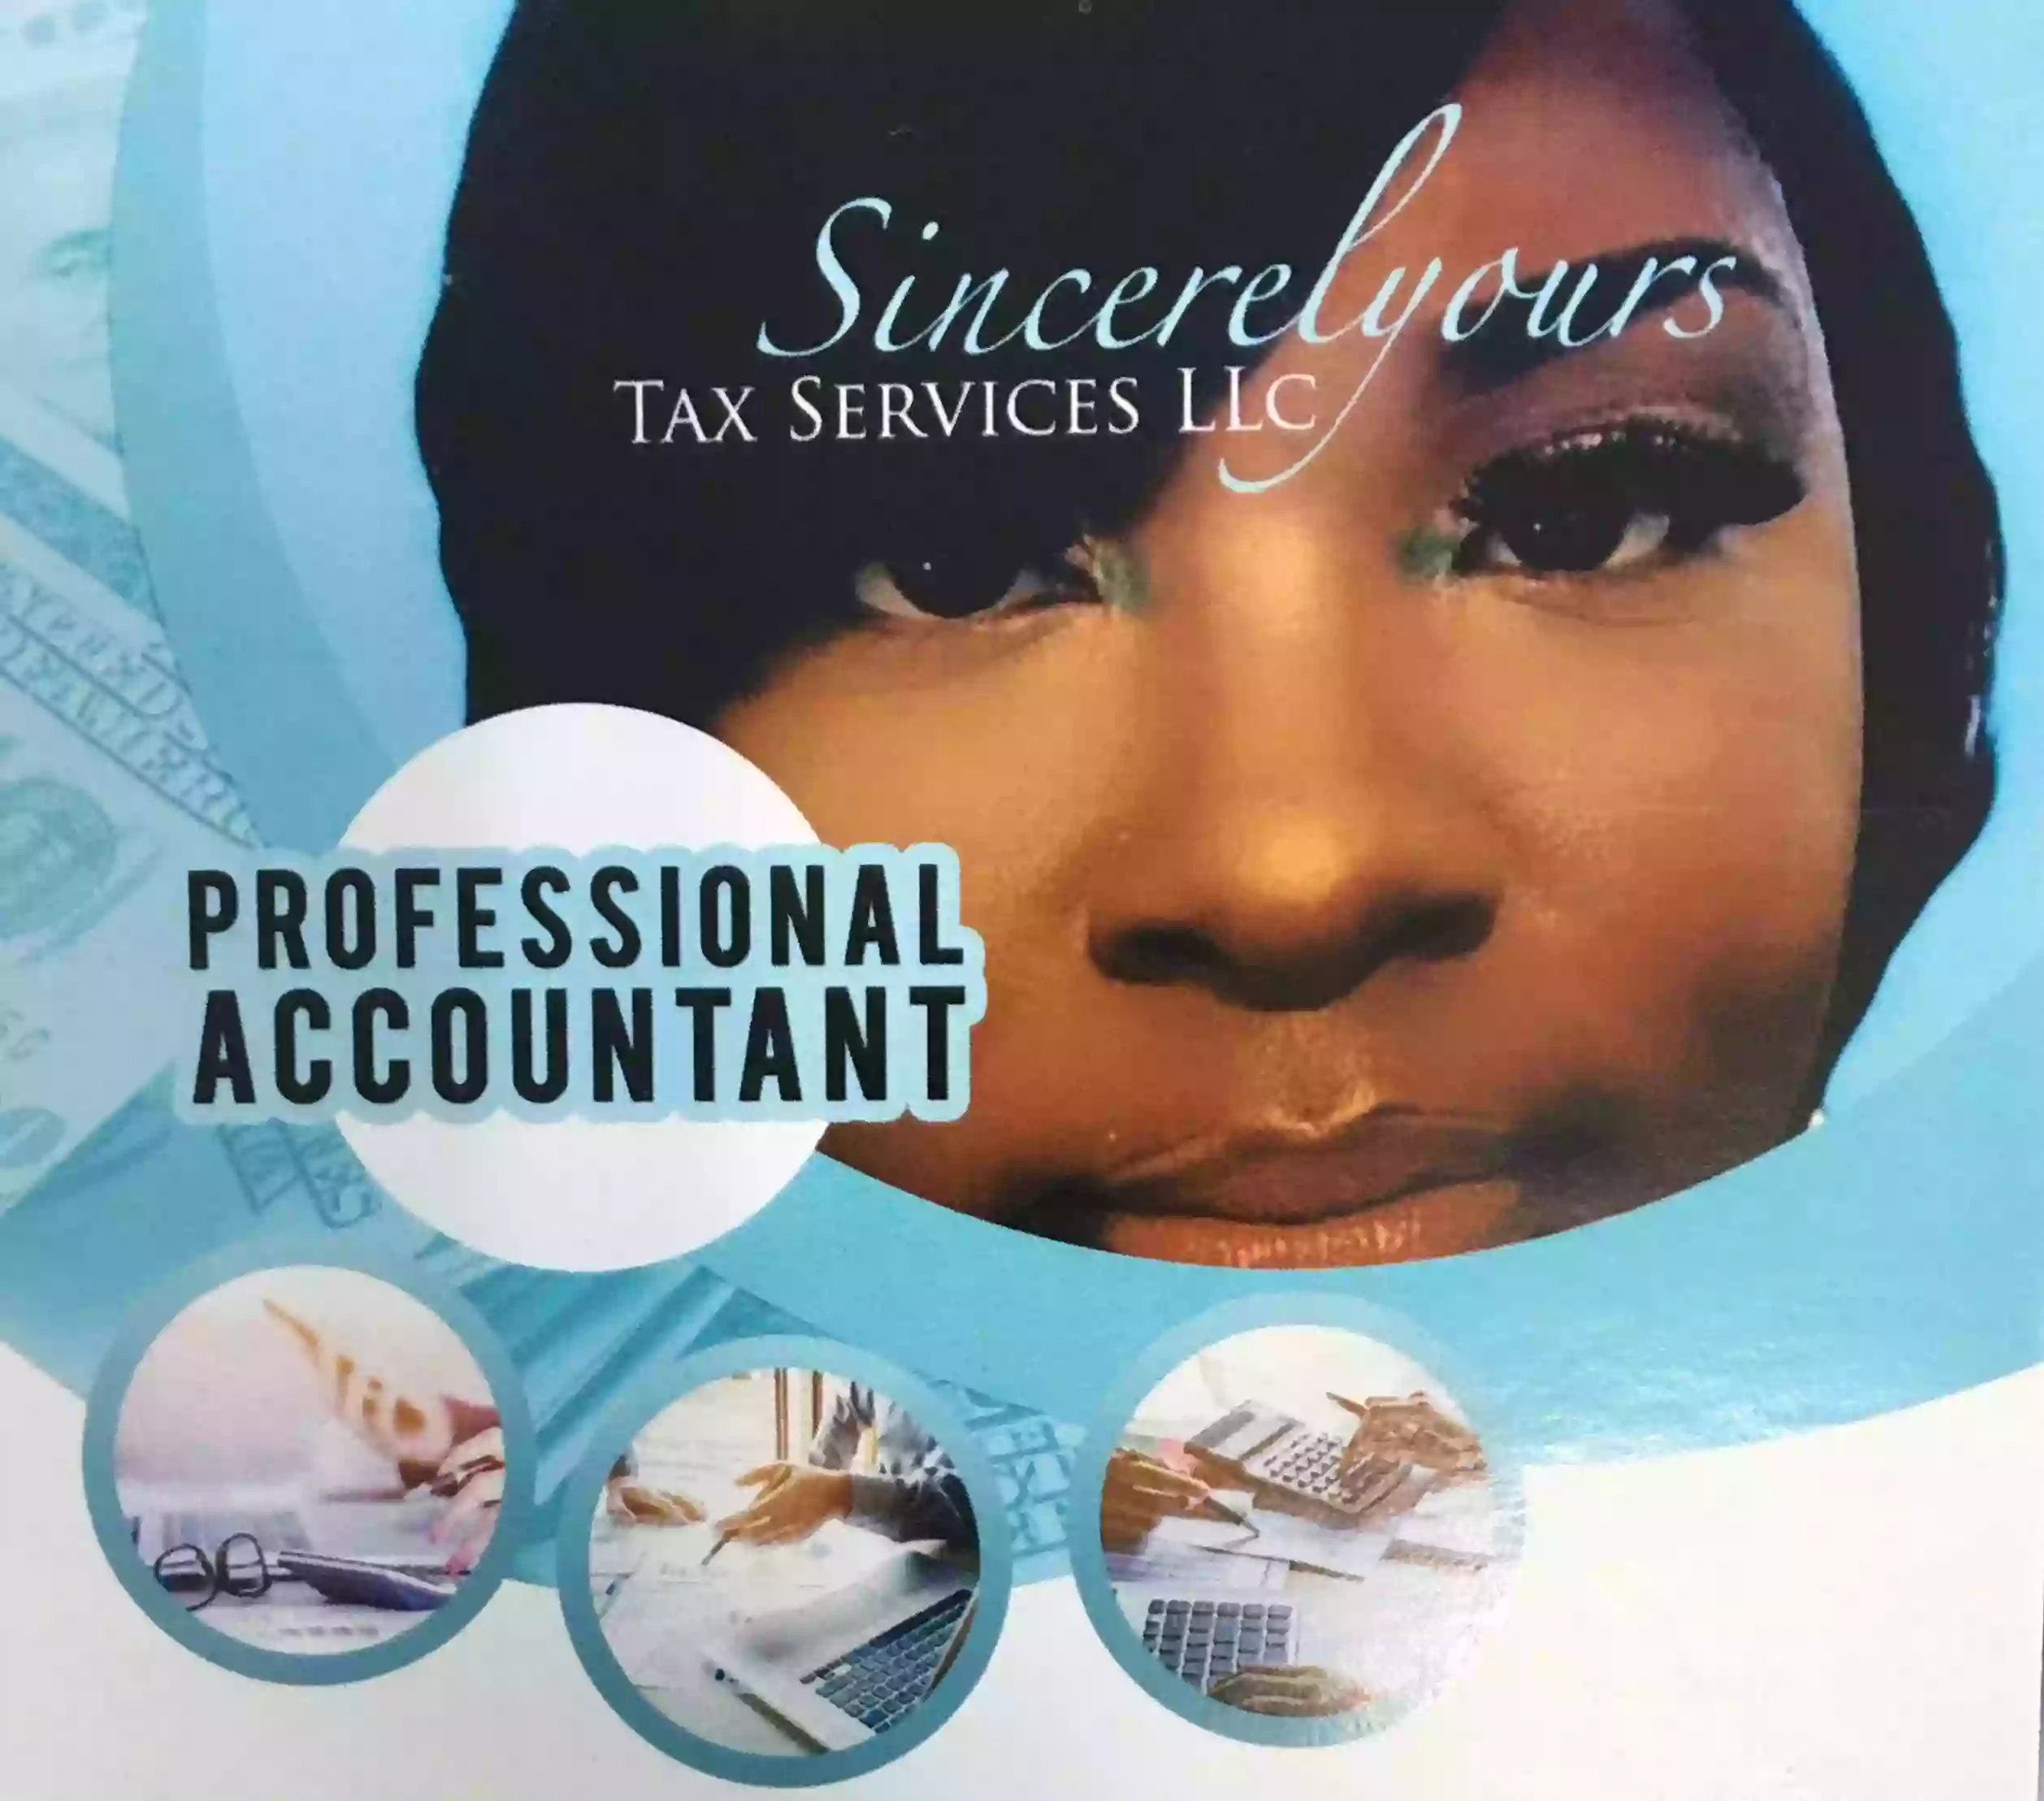 SINCERELYOURS TAX SERVICE LLC